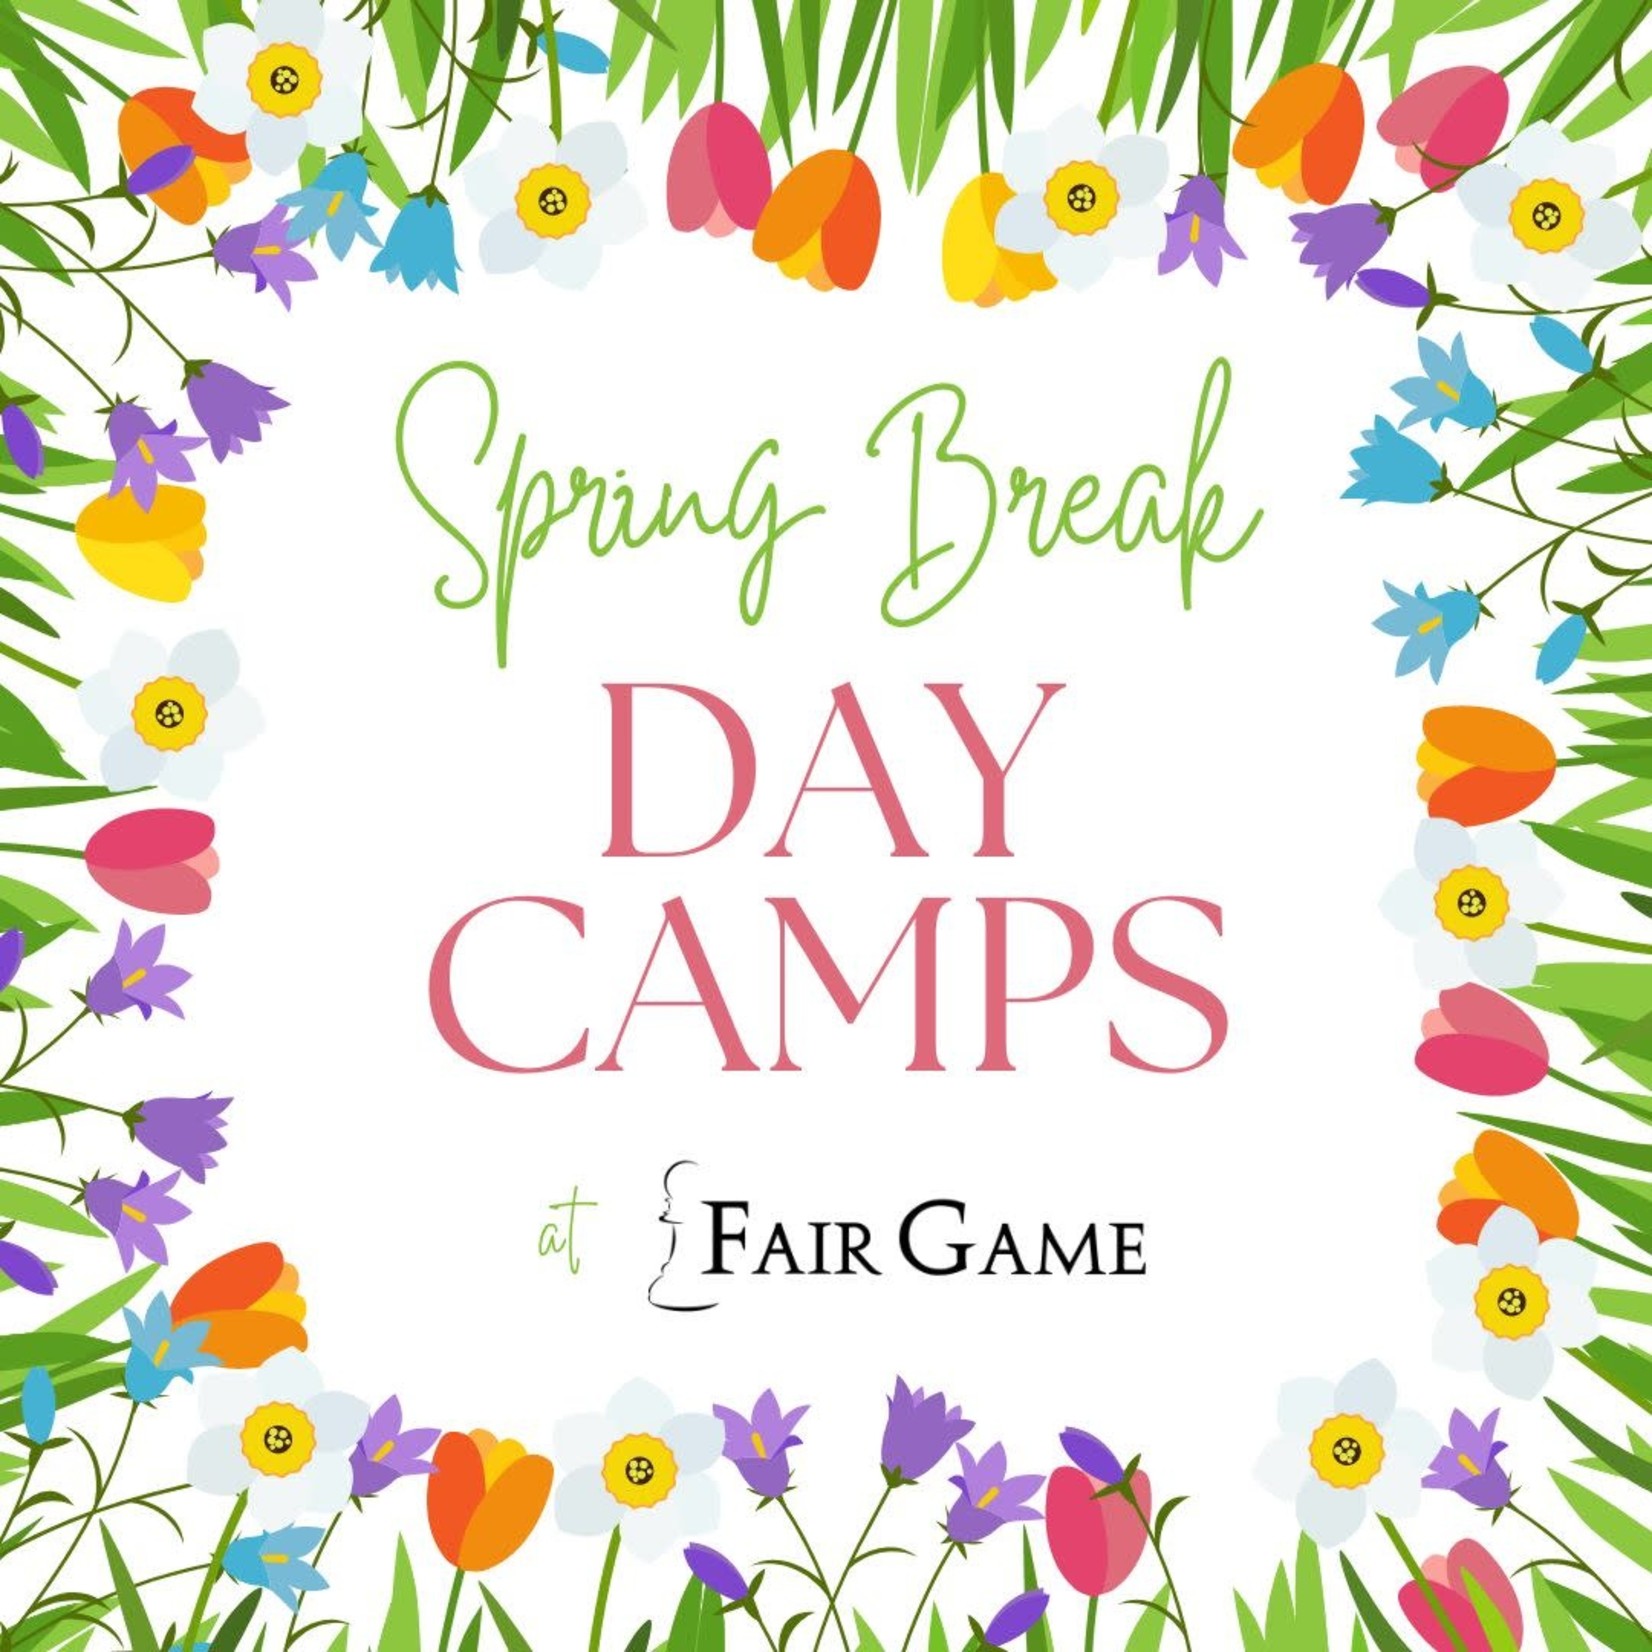 Fair Game Spring Break Day Camp: Learn to Play Pokemon (3/27, 12pm)